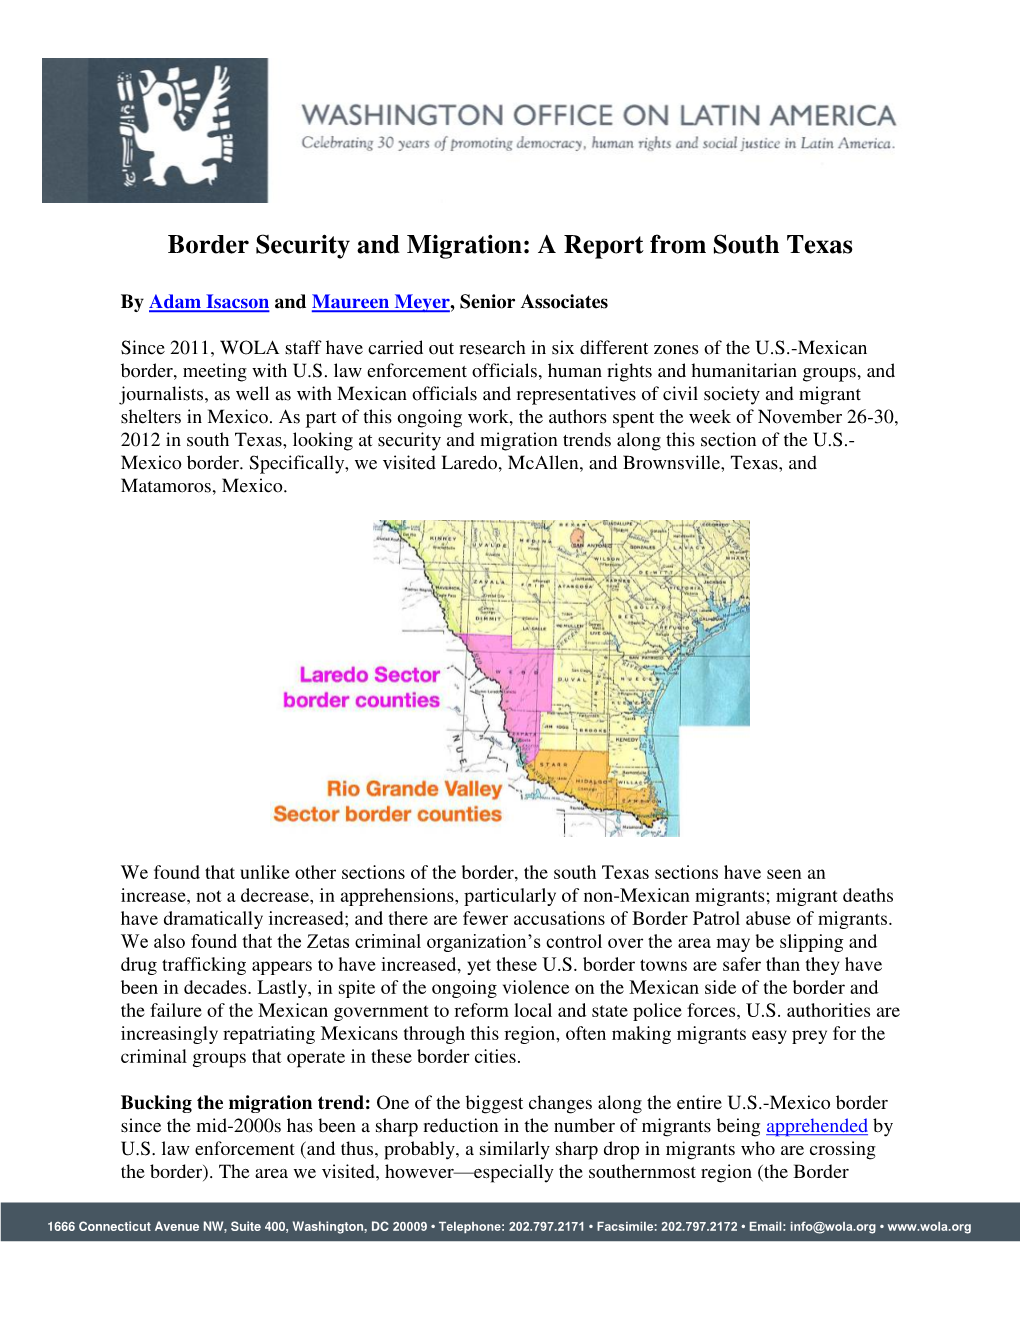 Border Security and Migration: a Report from South Texas